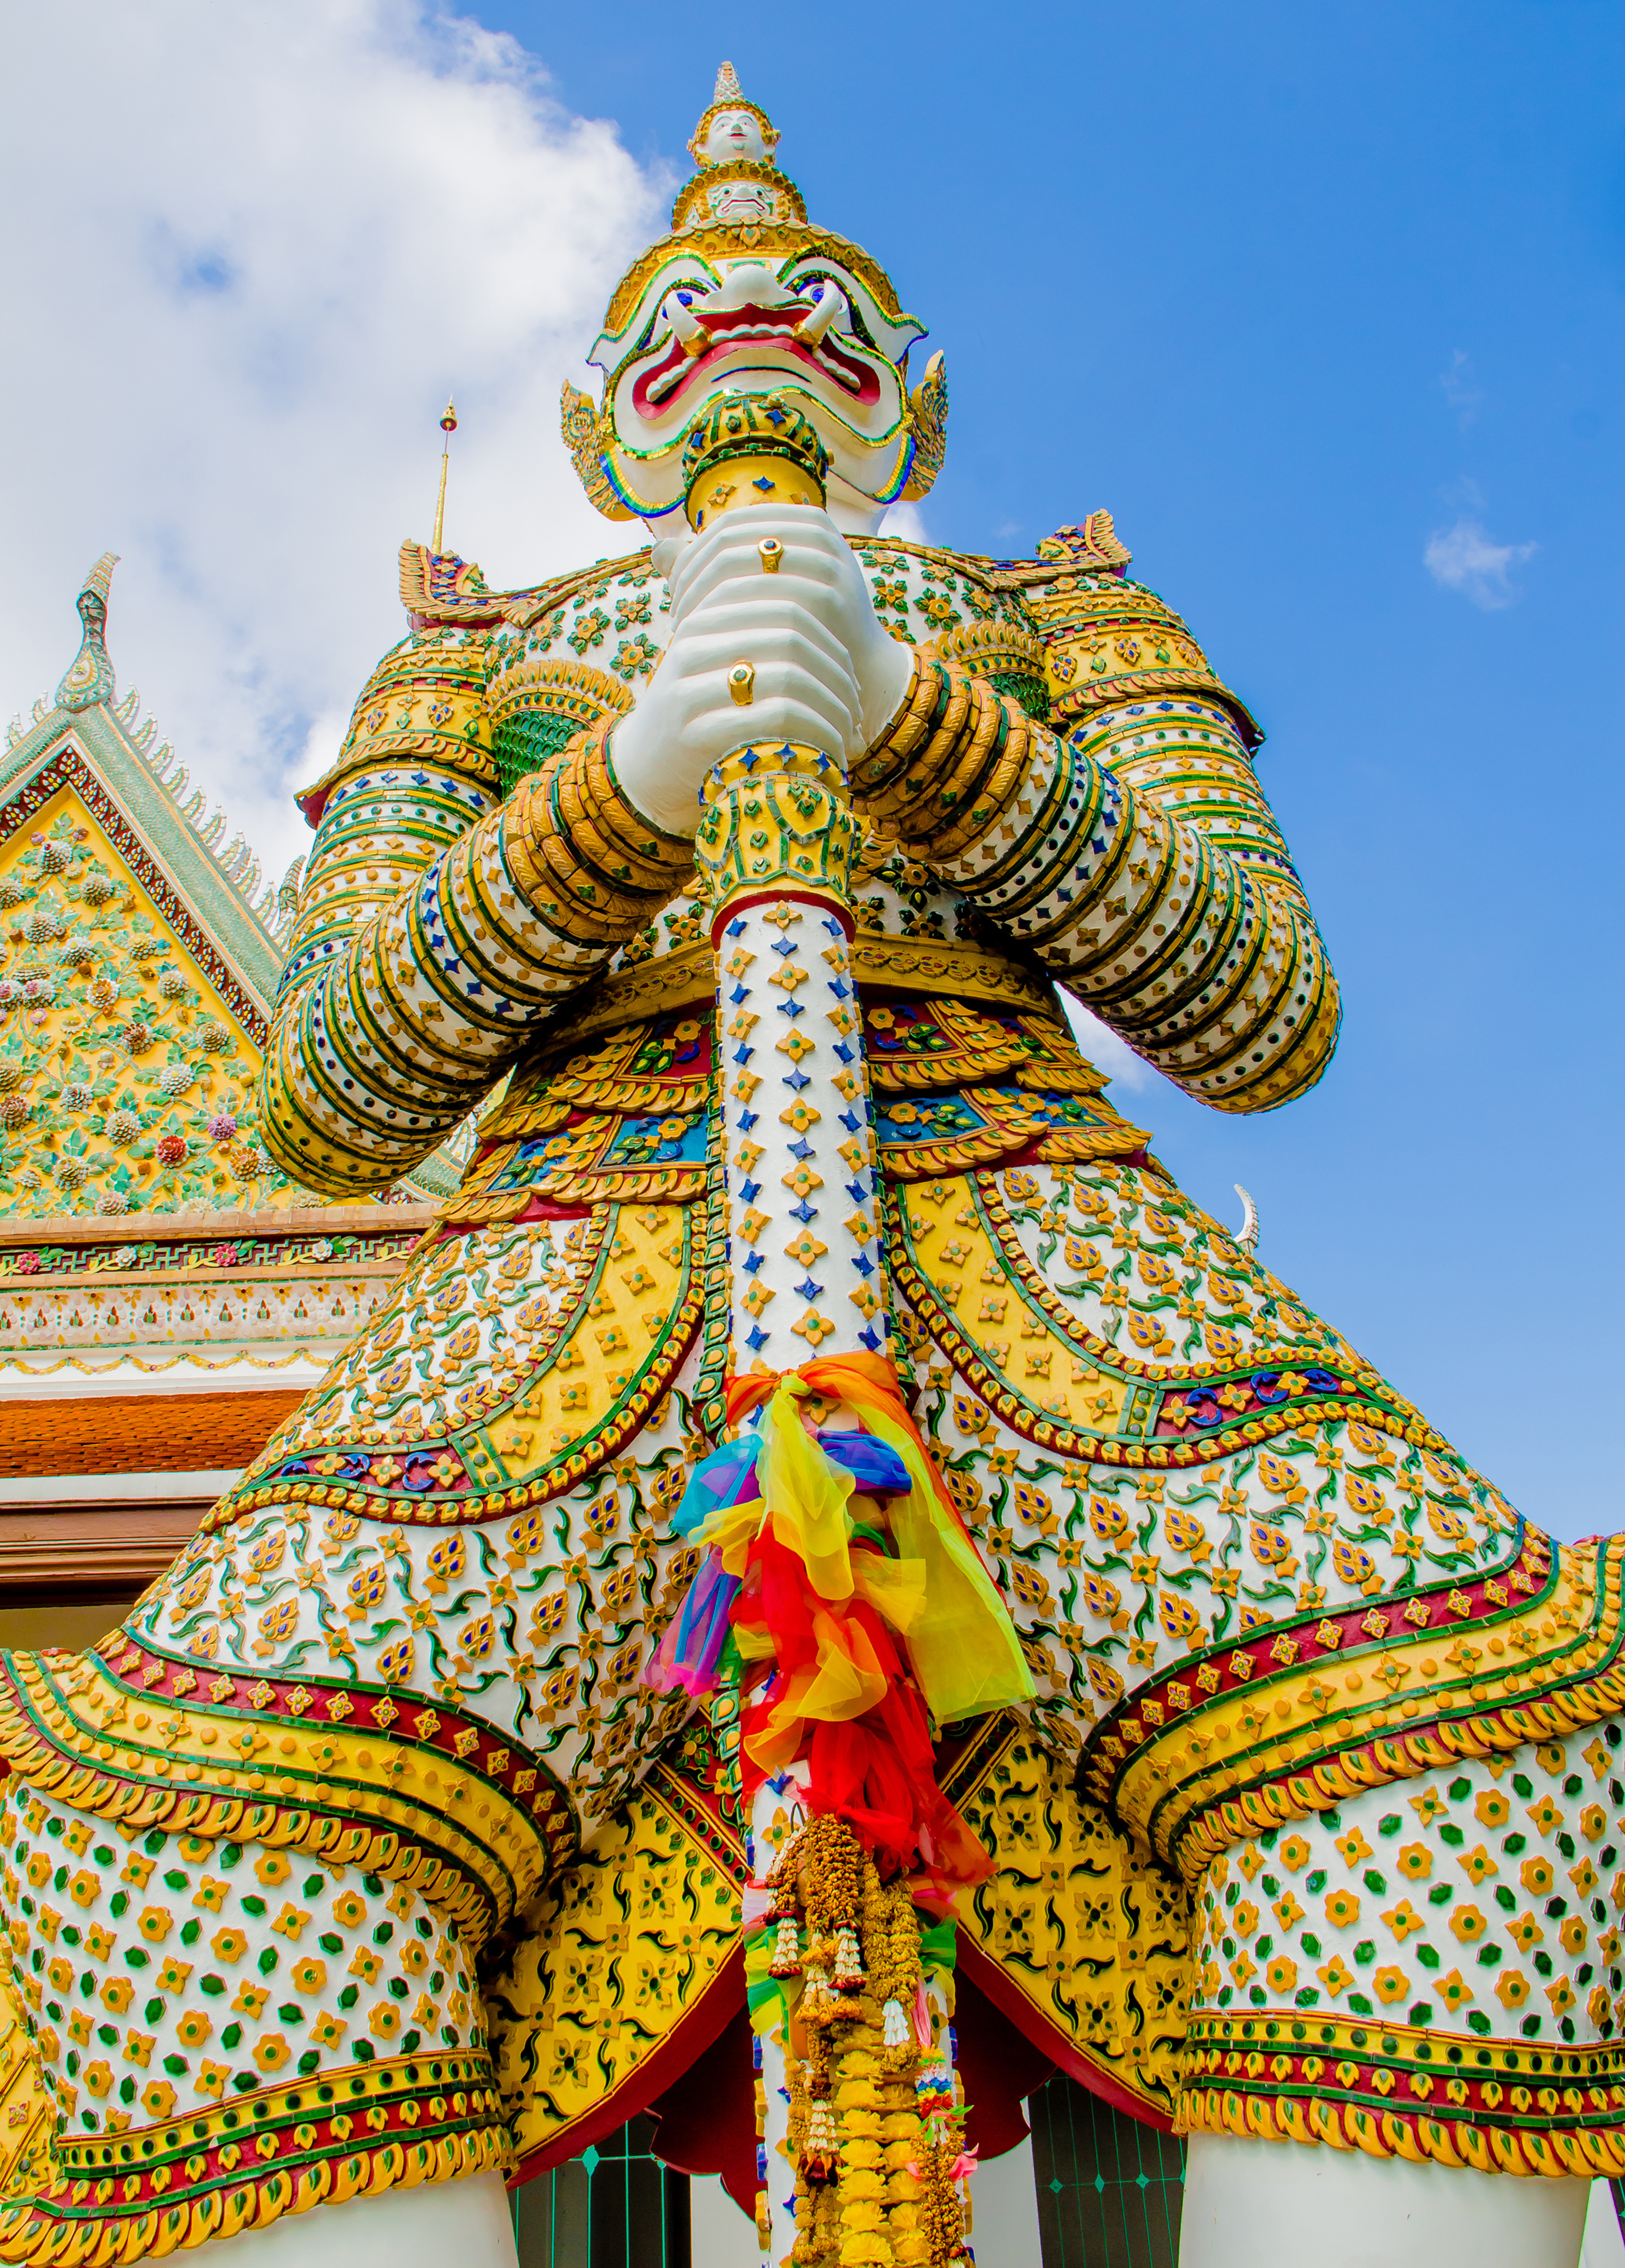 A colorful dvarapala (gate guardian) statue at the Grand Palace in Bangkok with a fearsome face and Thai headdress holding a baton.